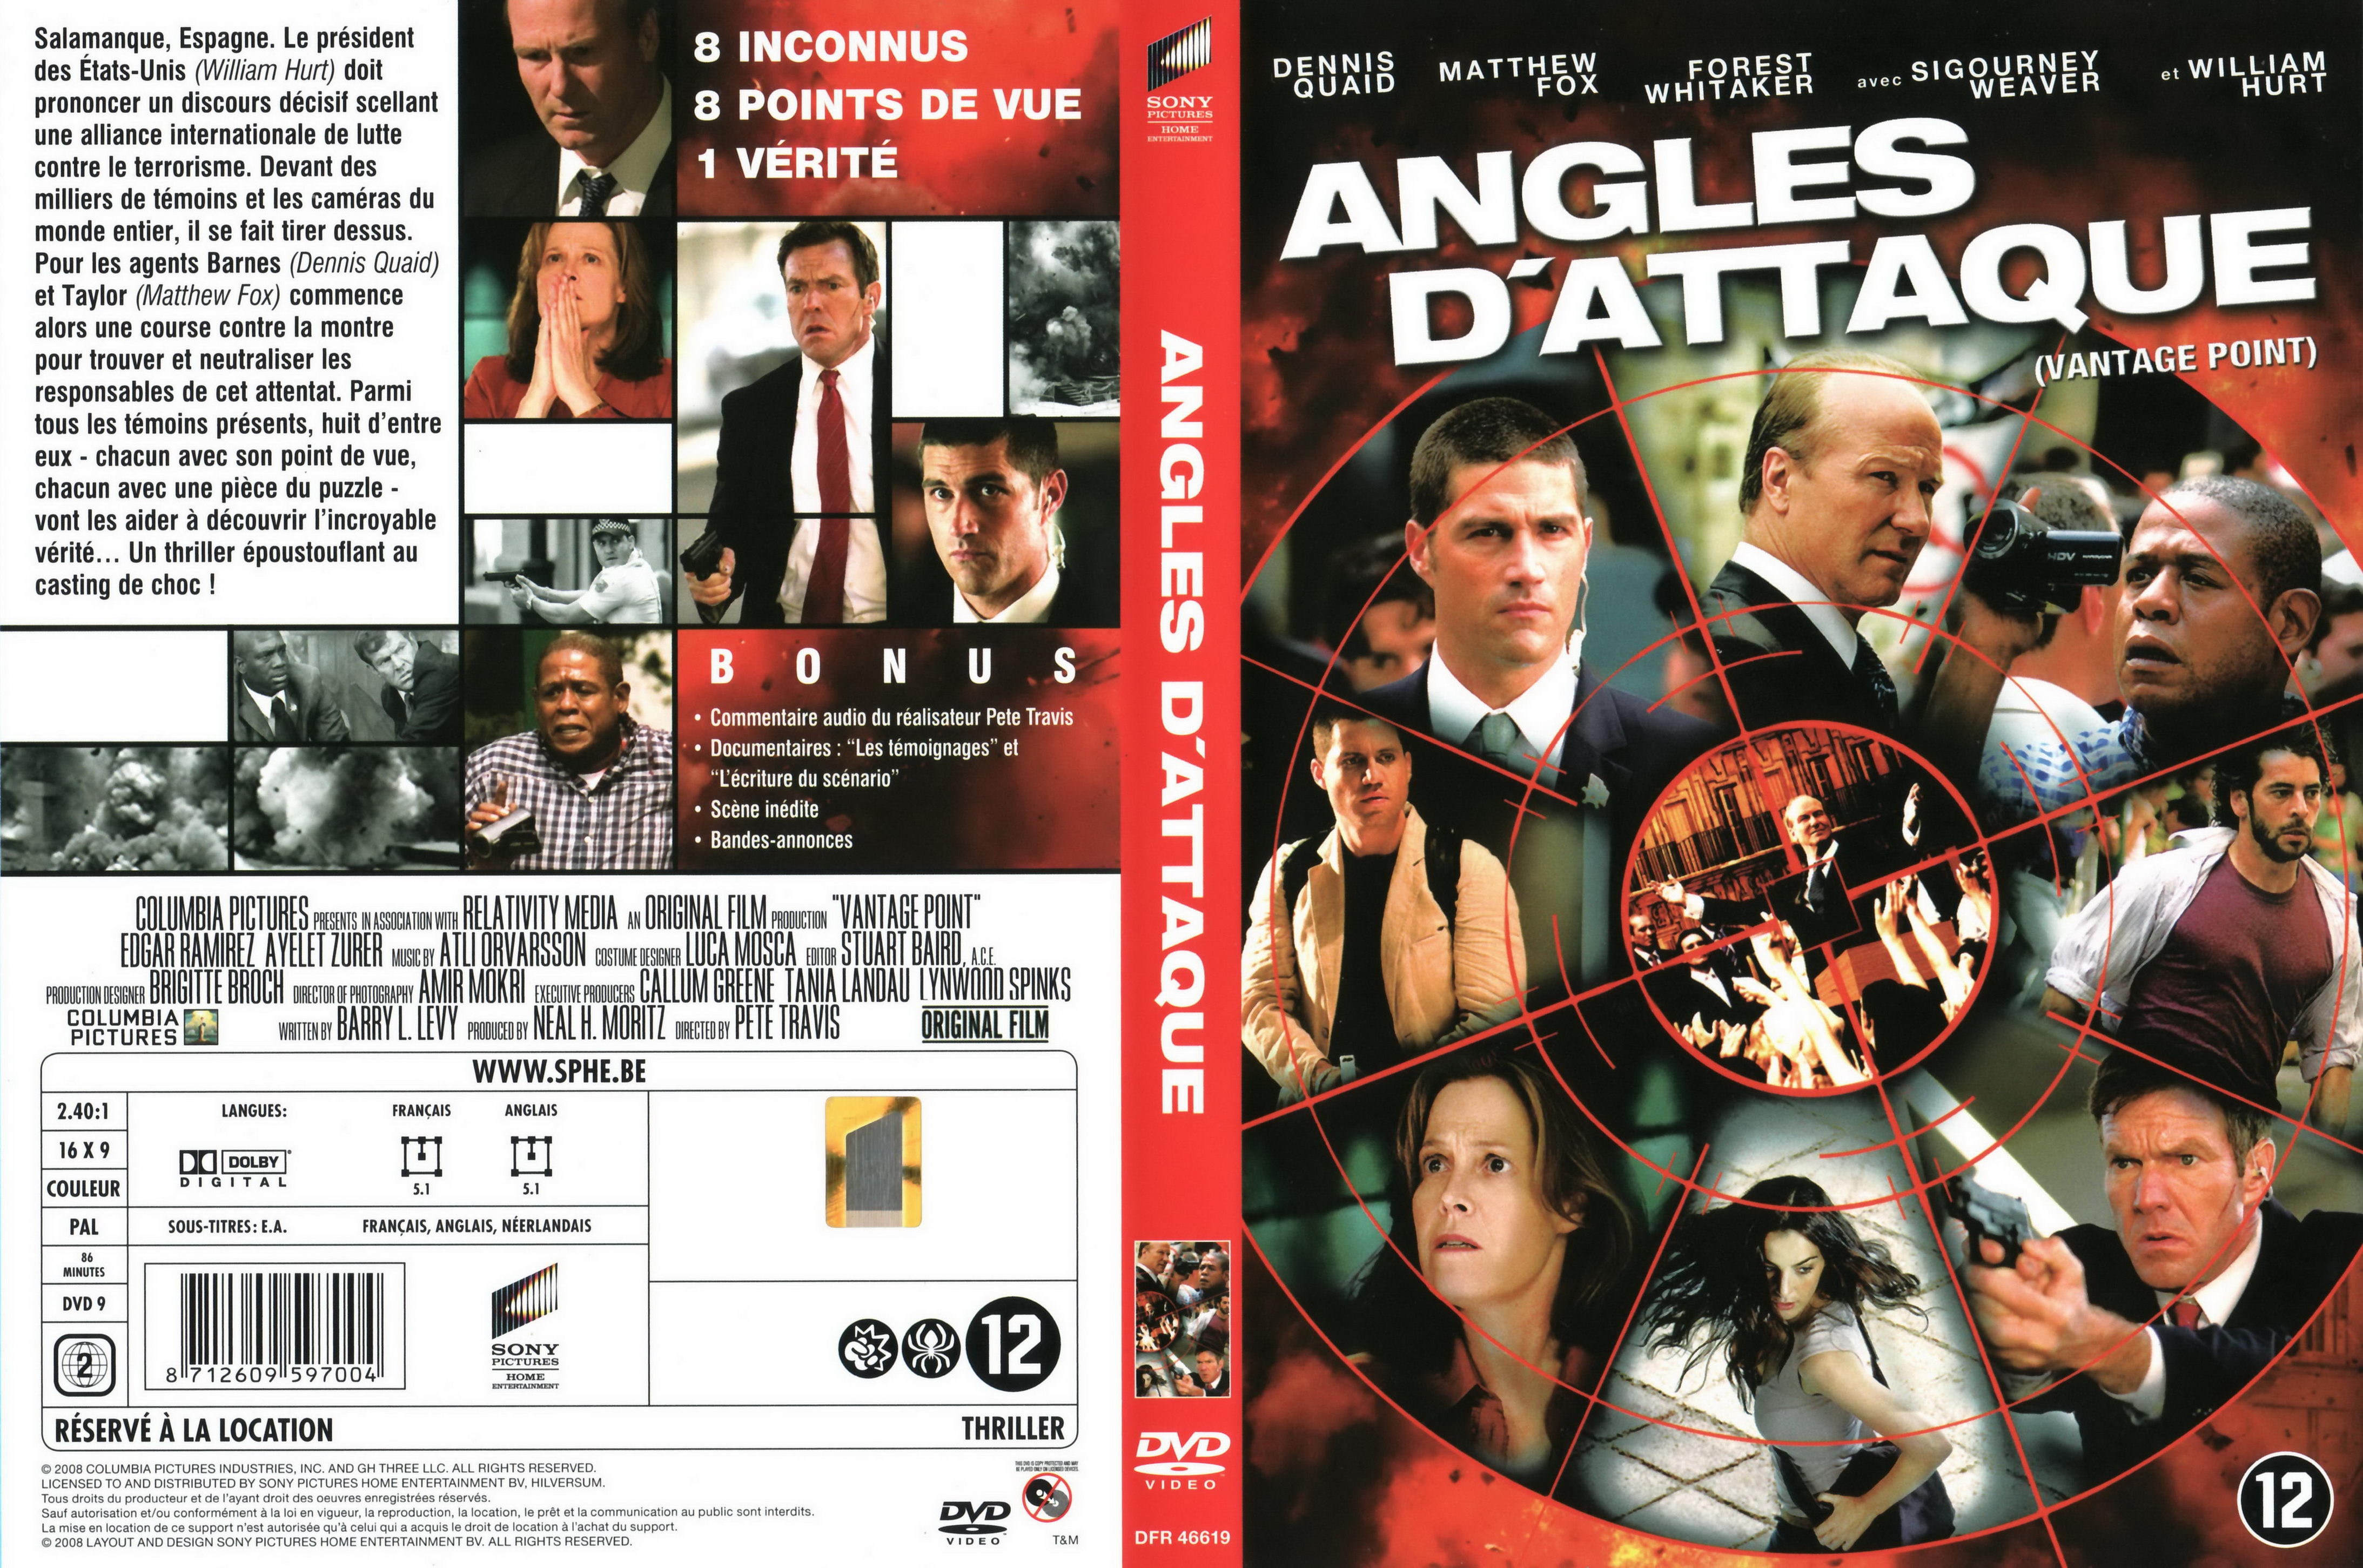 Jaquette DVD angles d